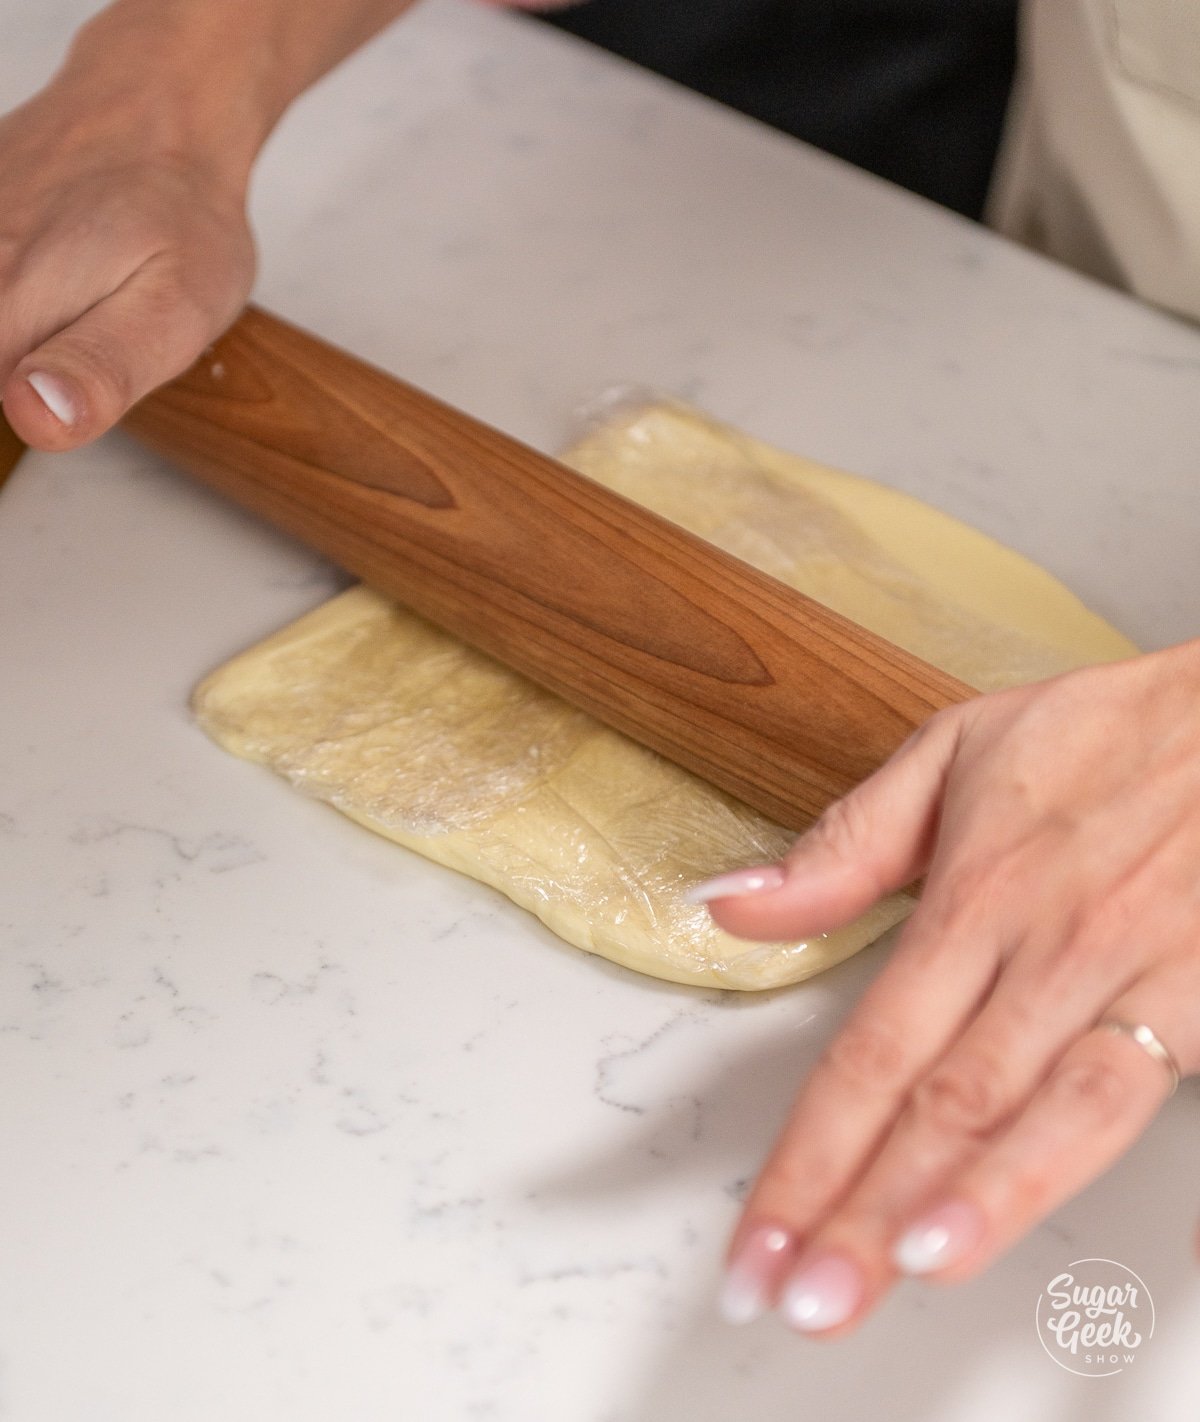 hands holding a wooden rolling pin over a butter block